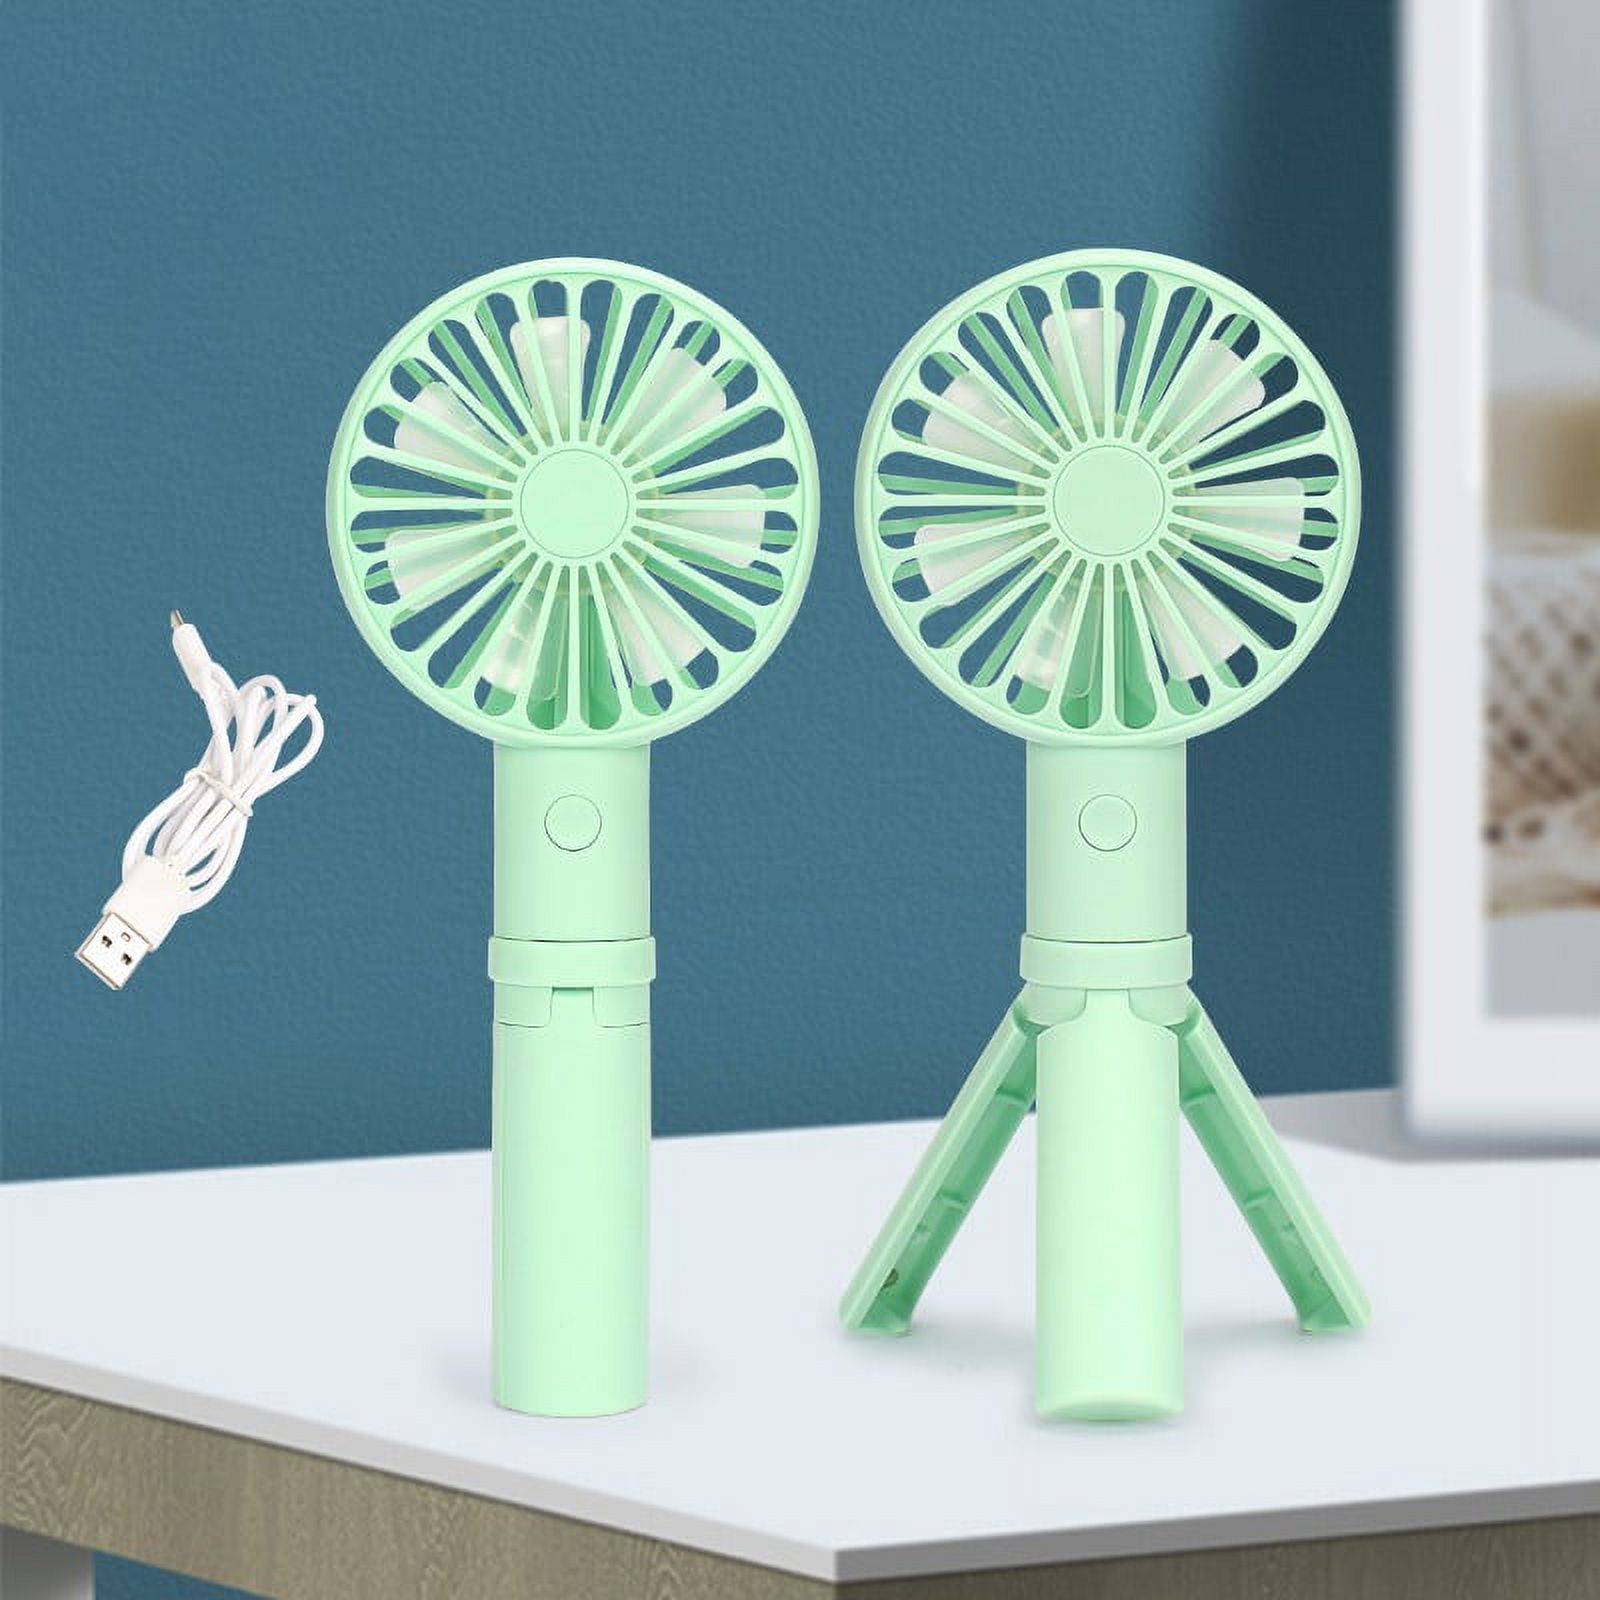 Handheld Portable Fan Mini Hand Fan, USB Rechargeable Personal Fan, Small Fan with 3 Speeds for Travel/Commute/Makeup(1 pack) - image 1 of 6